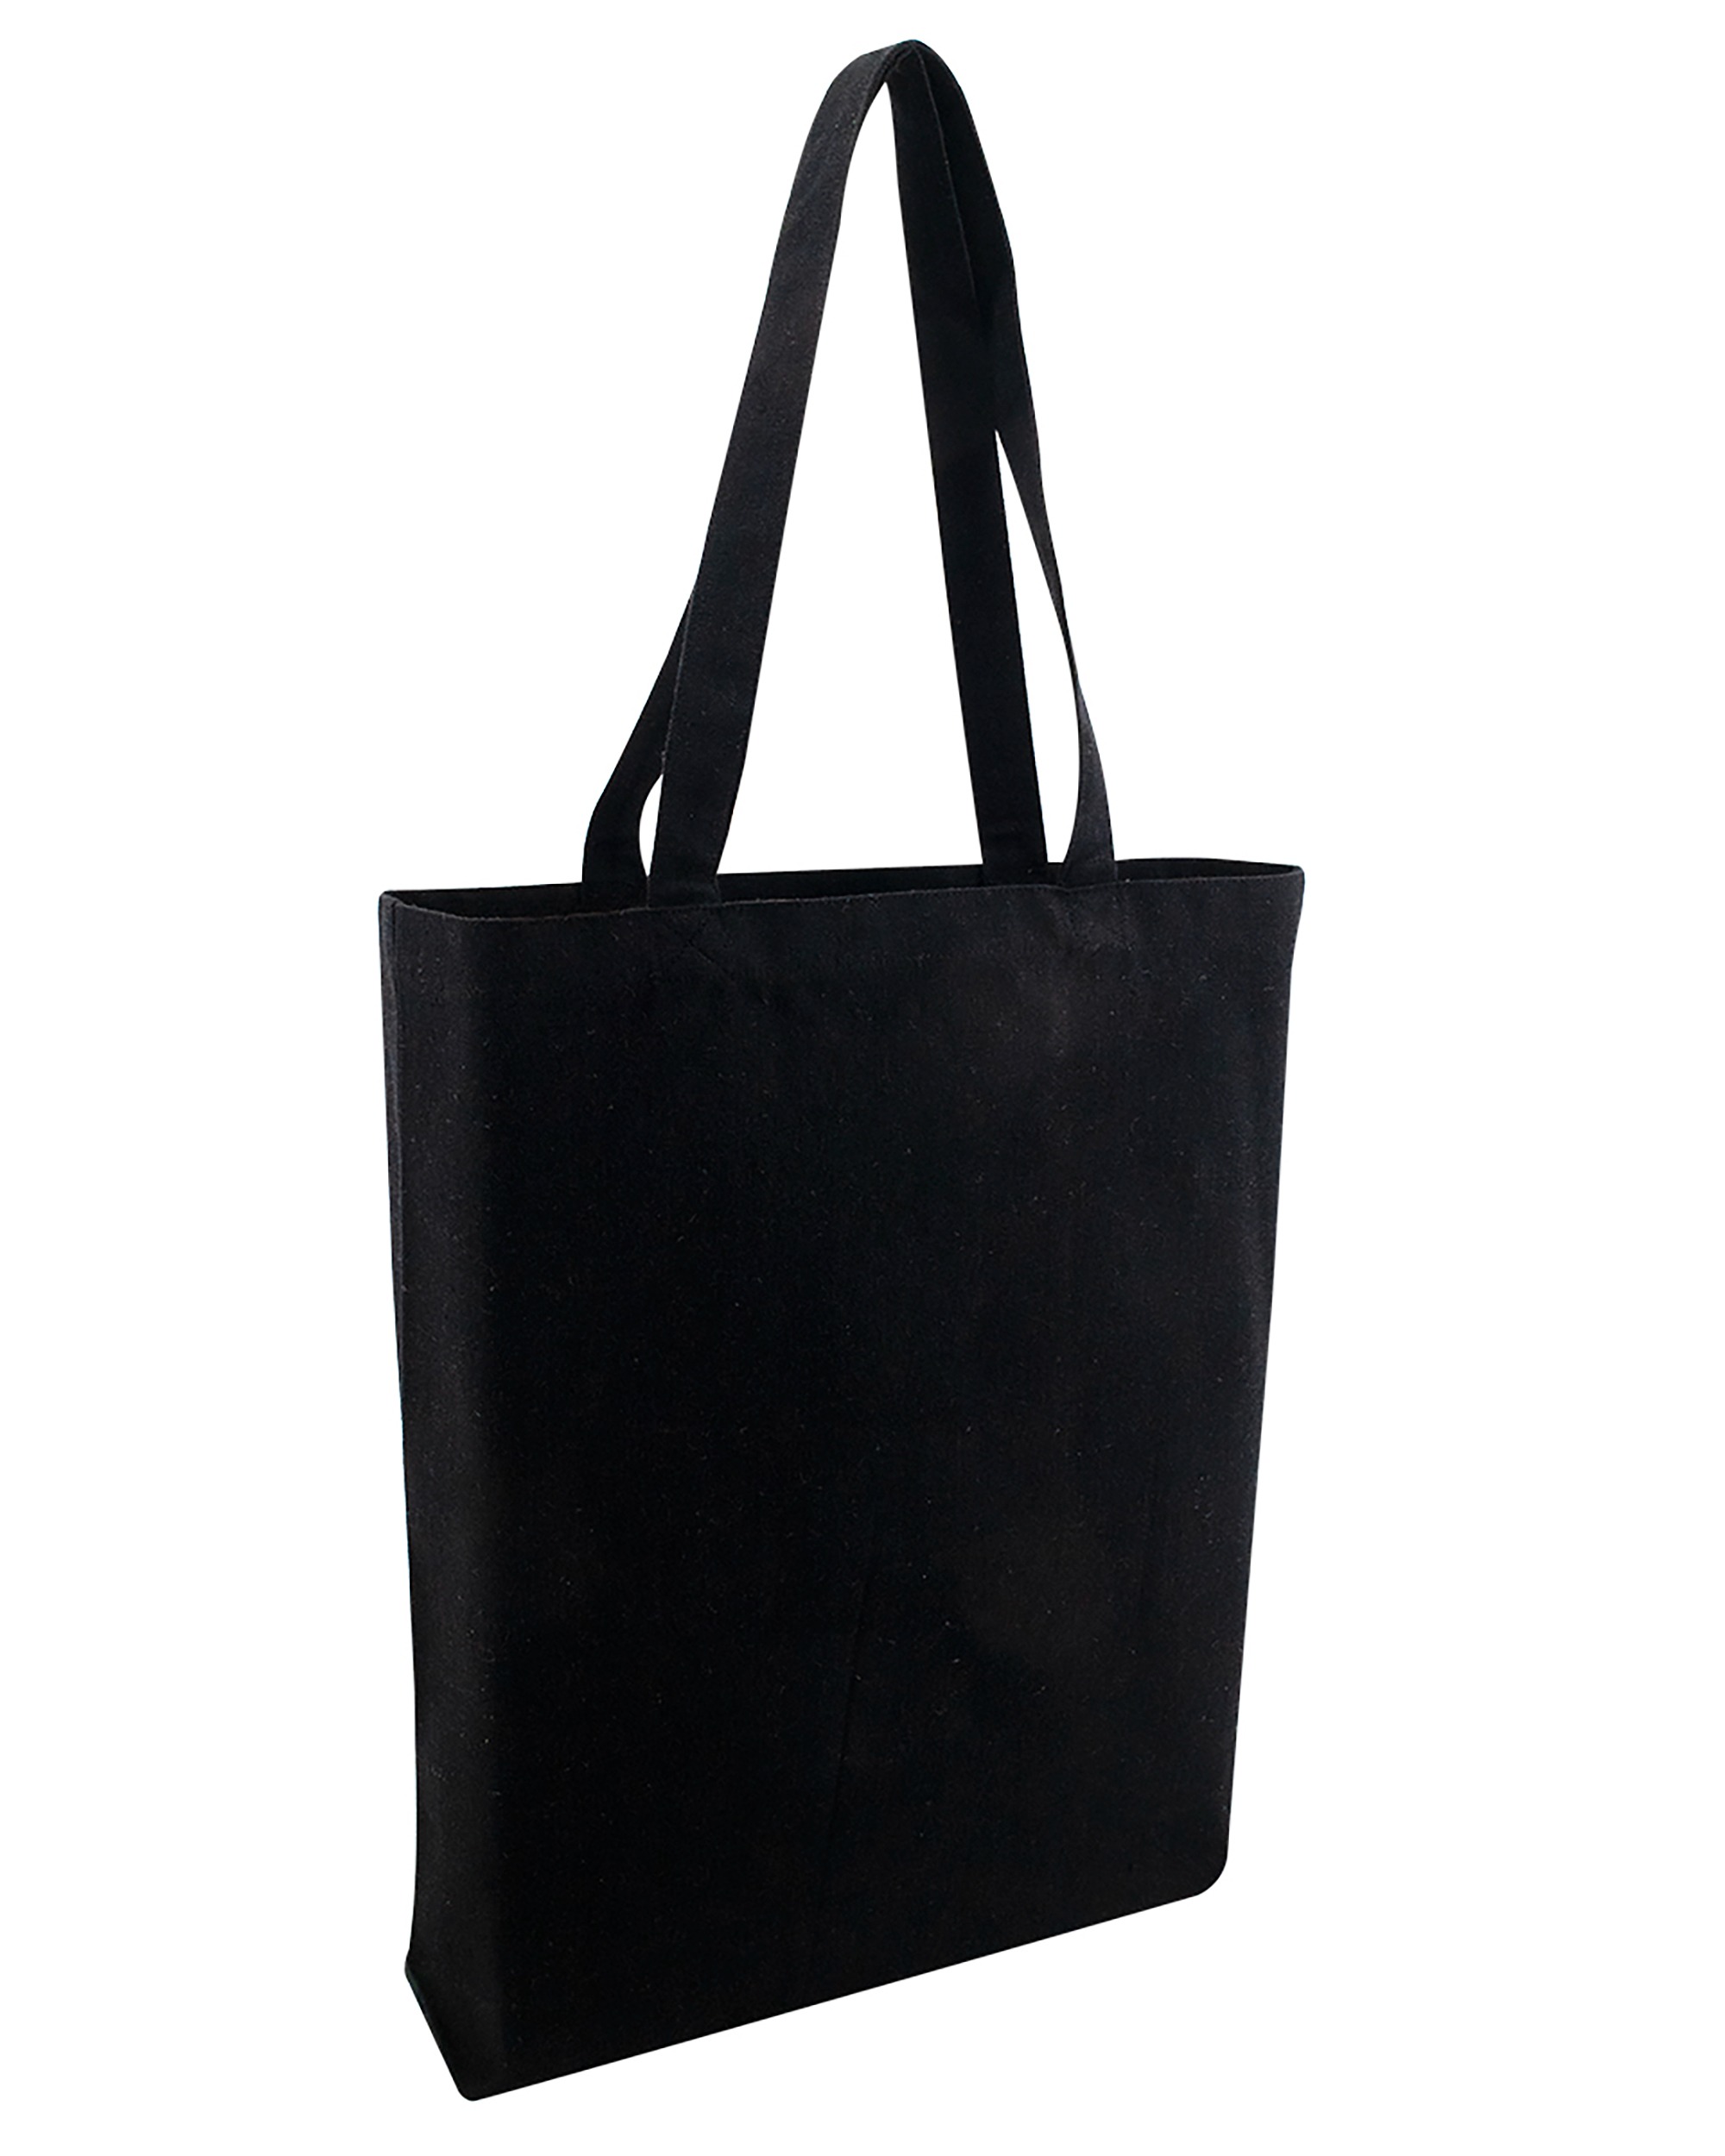 OAD® OAD106R Midweight Recycled Canvas Gusseted Tote